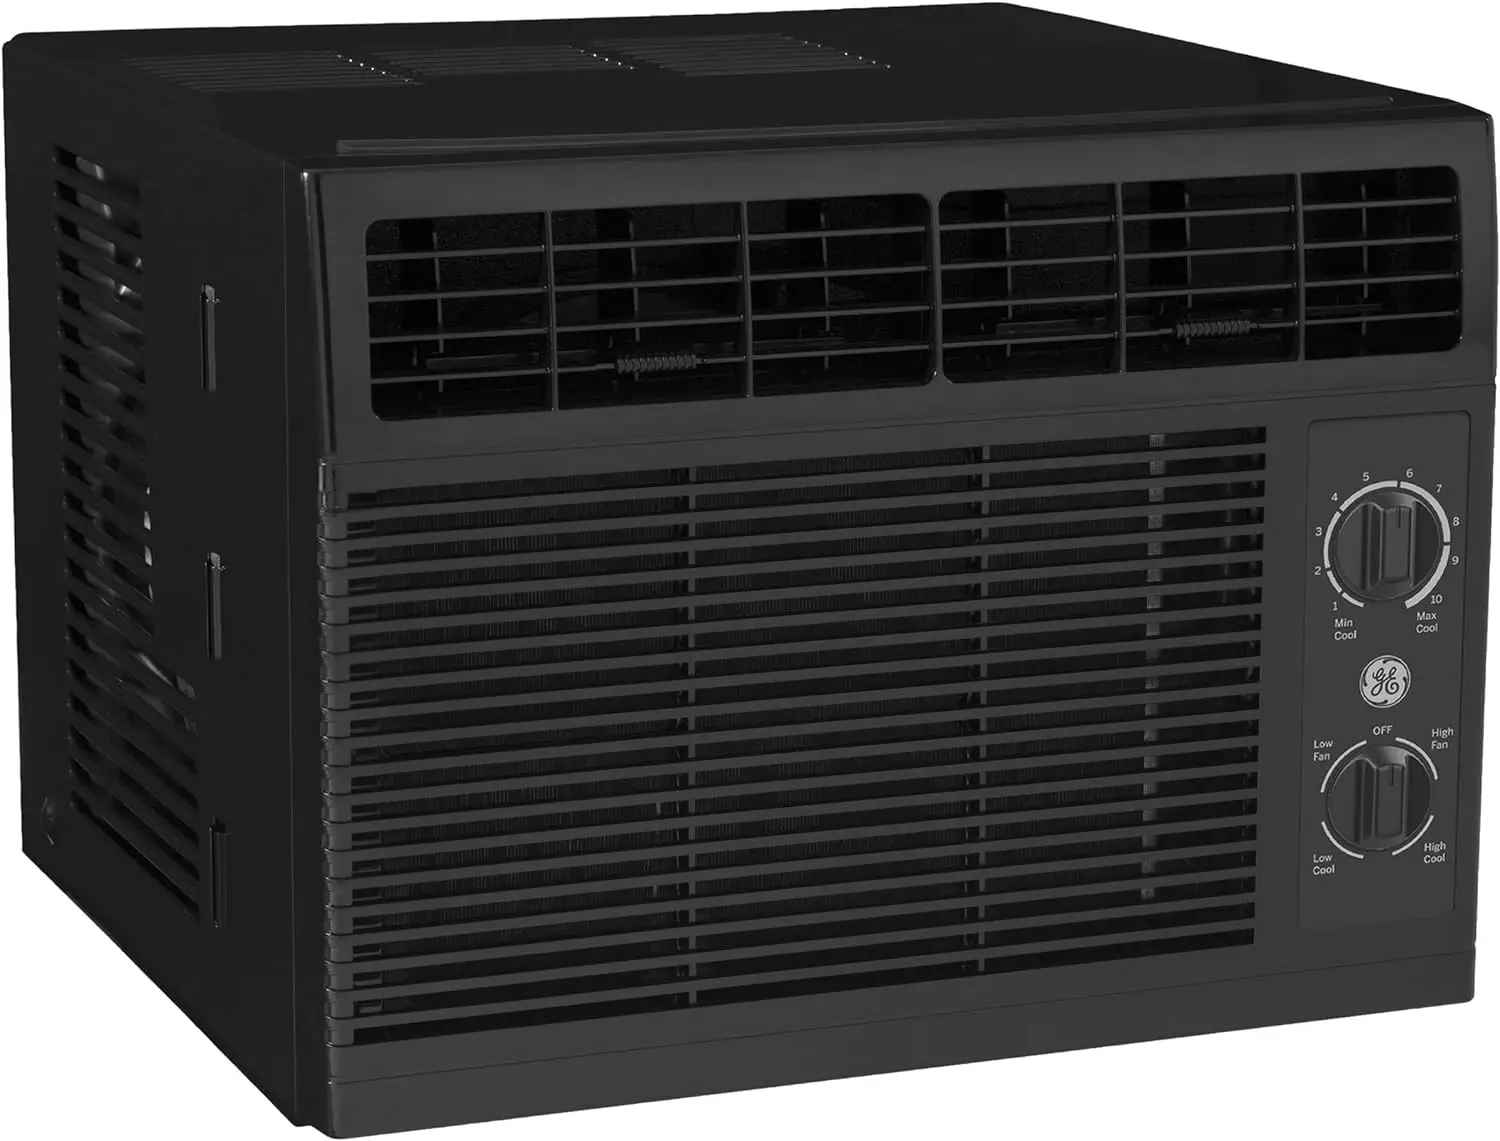 

Window Air Conditioner 5000 BTU, Black, Efficient Cooling for Smaller Areas Like Bedrooms and Guest Rooms, 5K BTU Window AC Unit